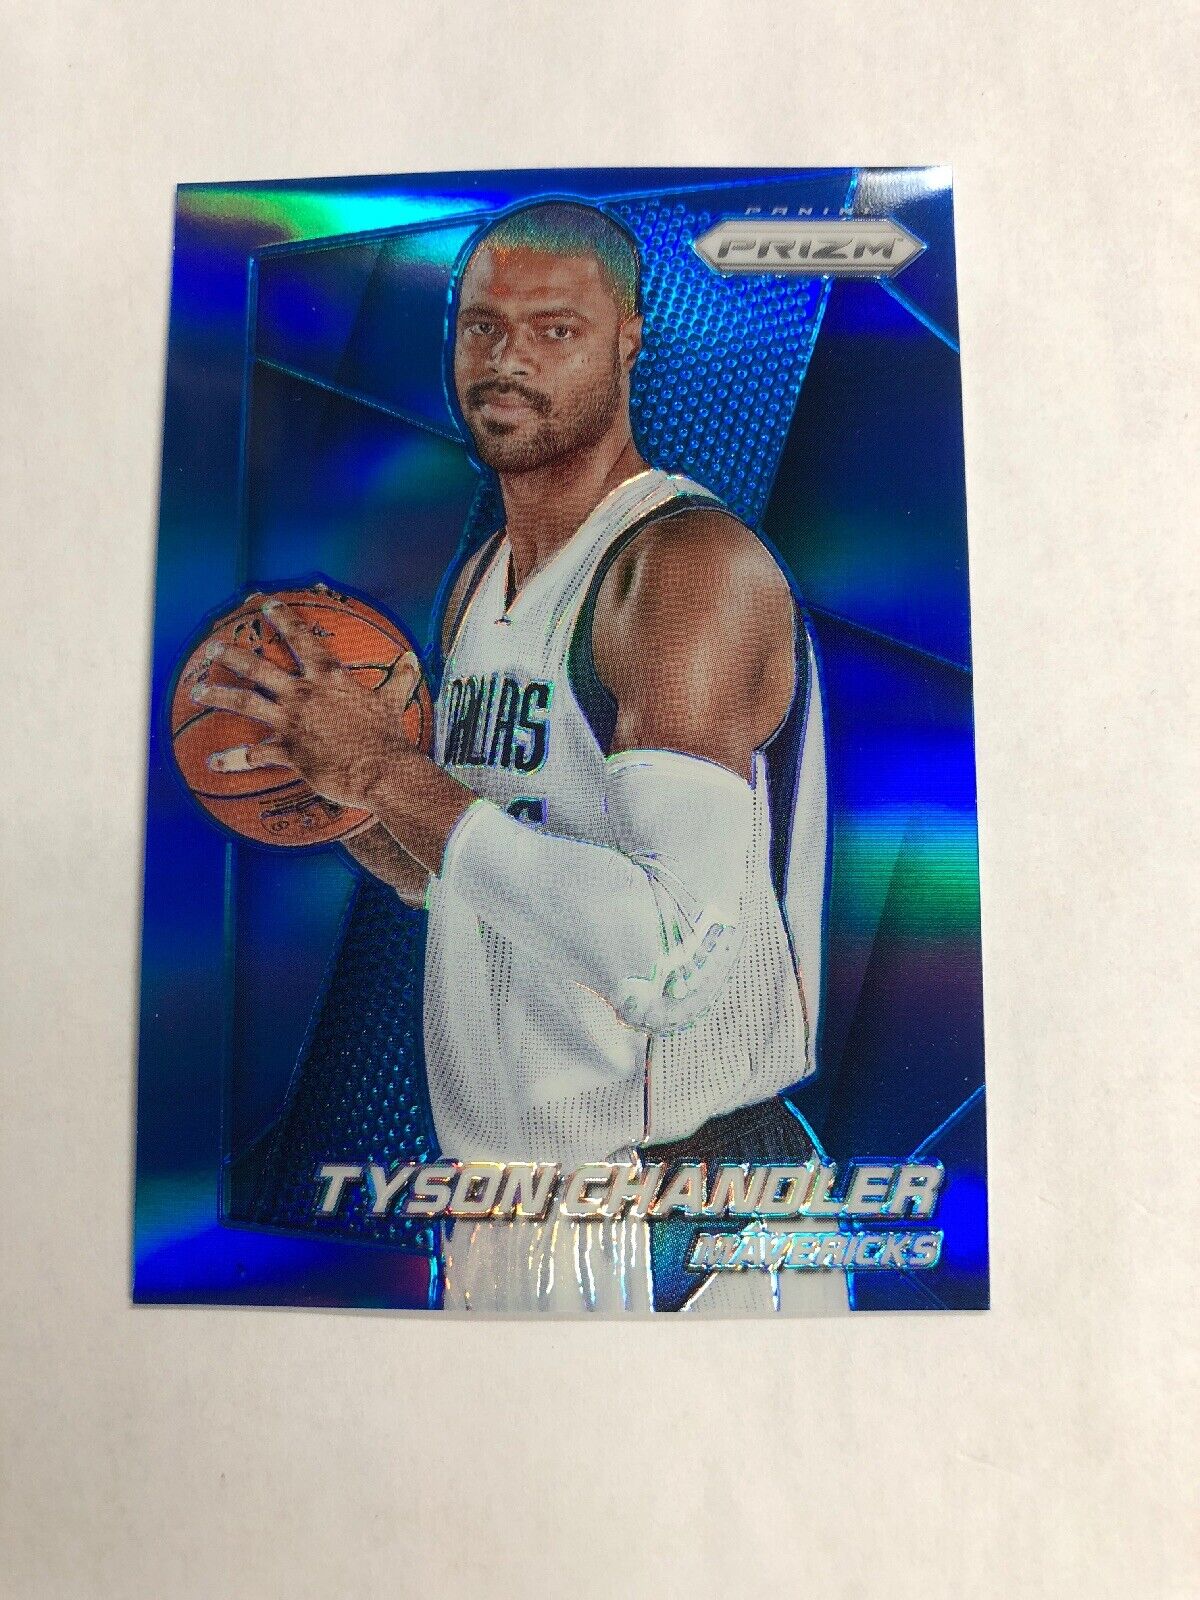 2014-15 Panini Prizm Tyson Chandler #114 Blue Refractor Numbered 78/99